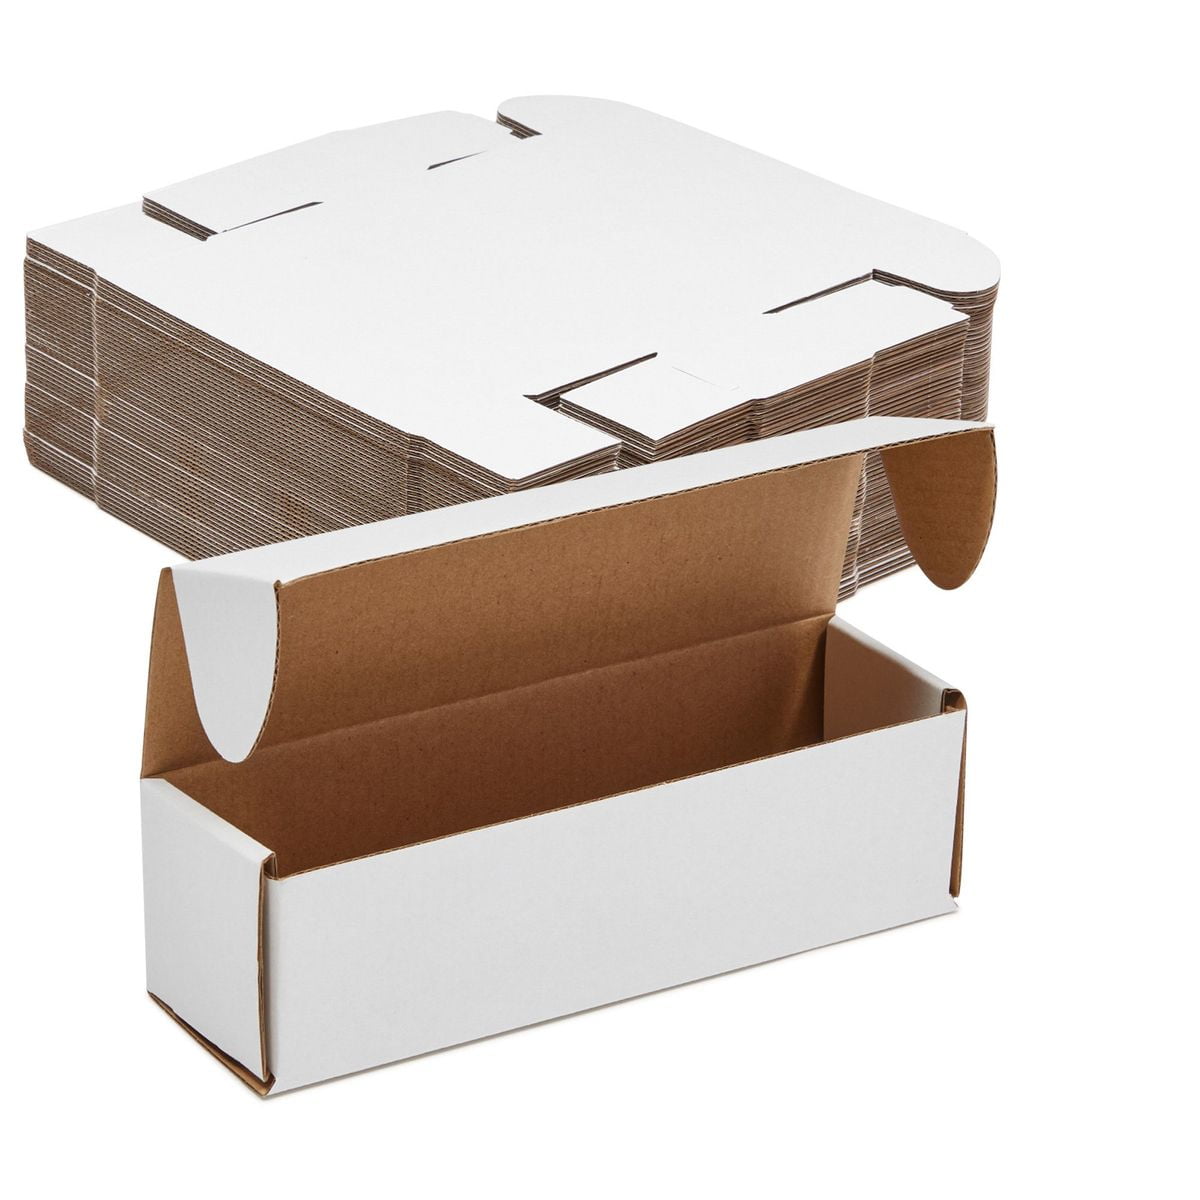 Details about   50 White Postal Cardboard Boxes Mailing Shipping Cartons Small Size Parcel OP7 